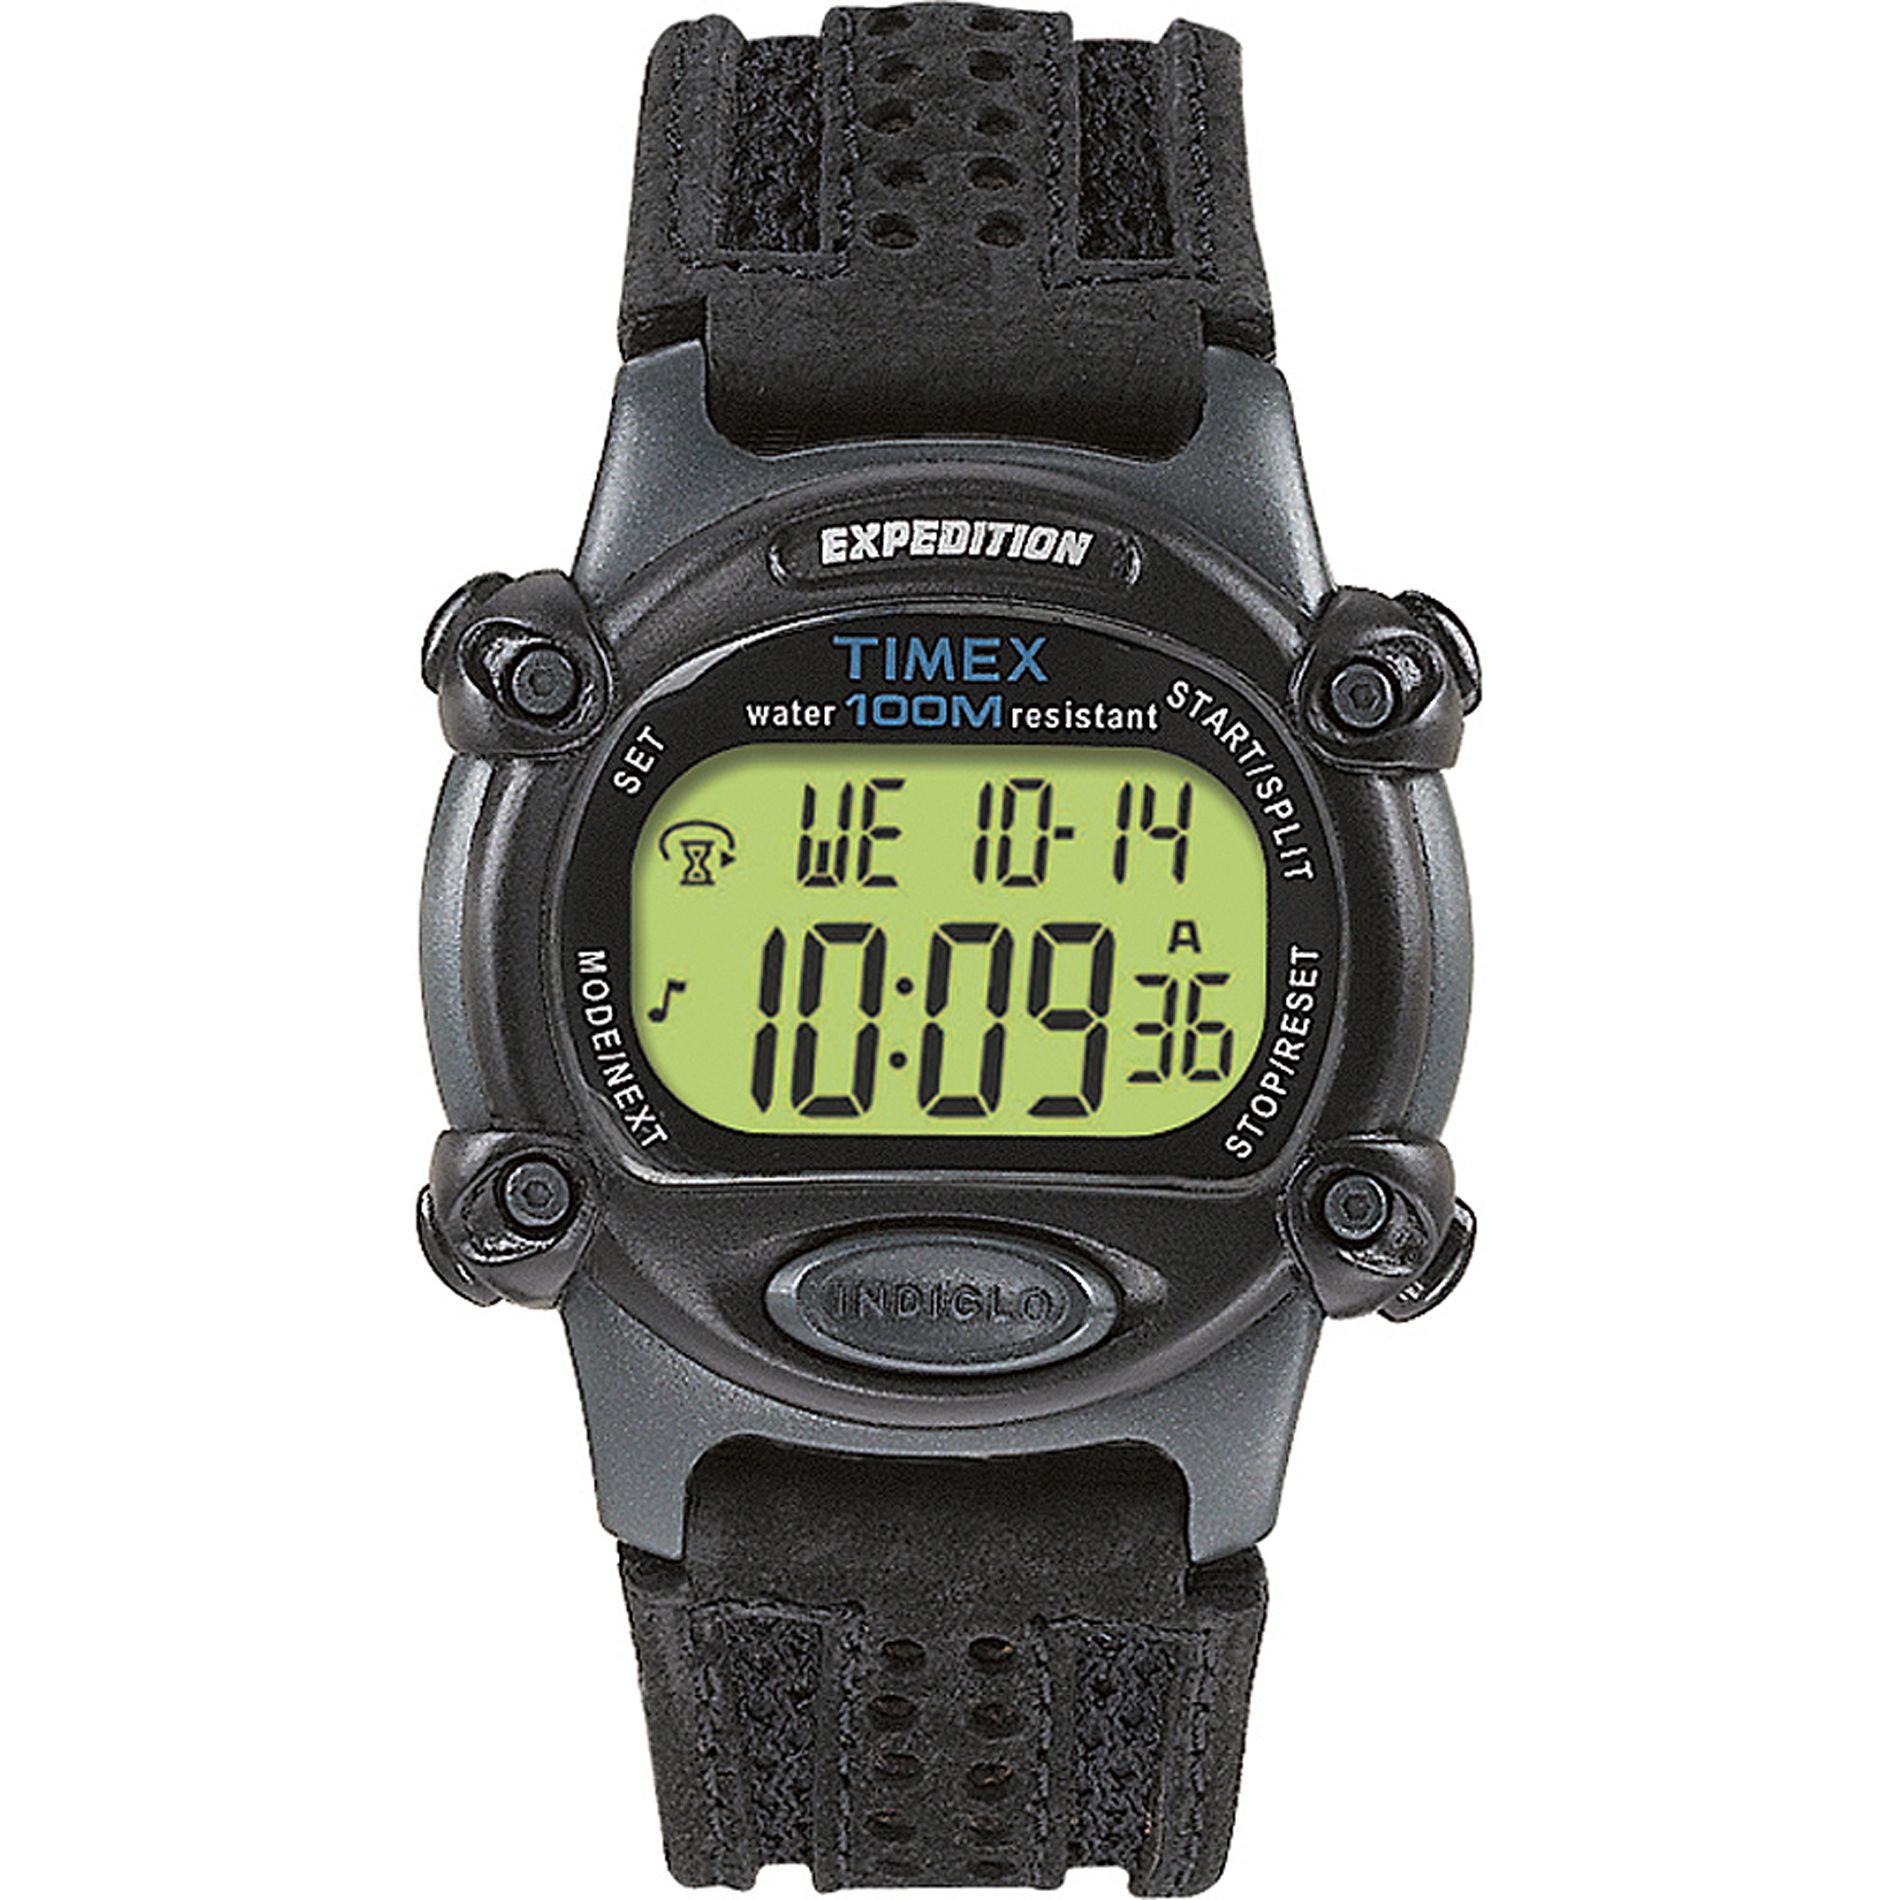 Timex Expedition with Chrono/Alarm/Timer